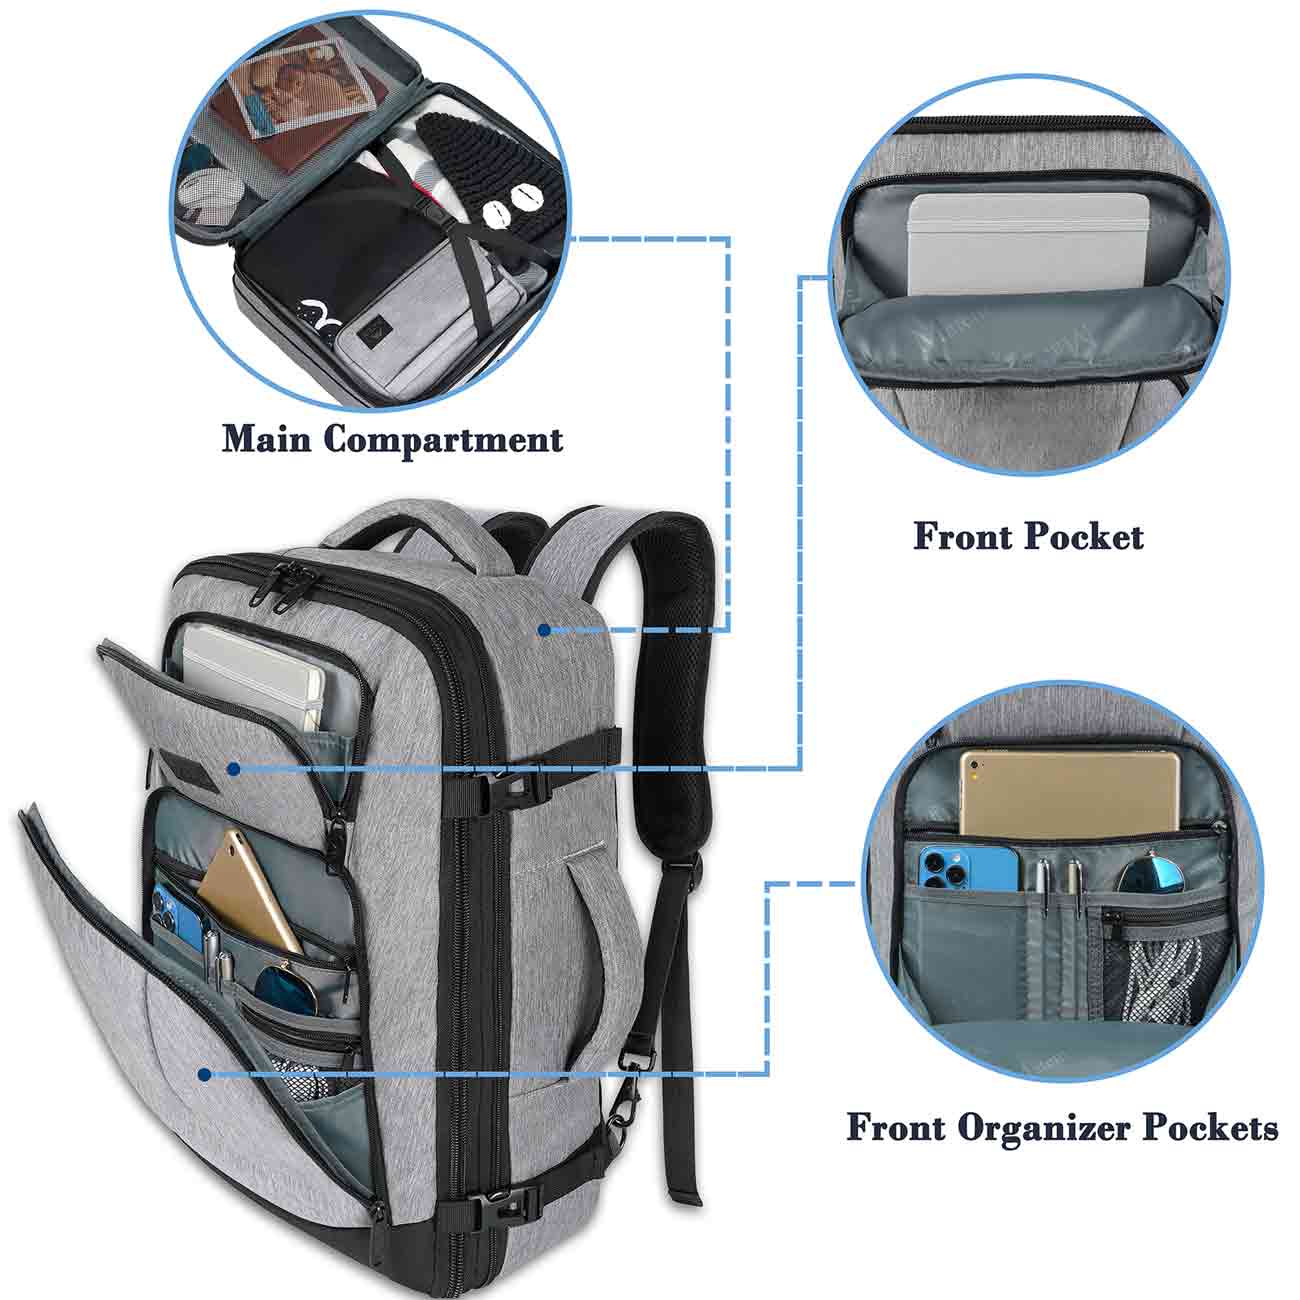 Matein Travel Backpack with Toiltry Bag-Carry on backpack